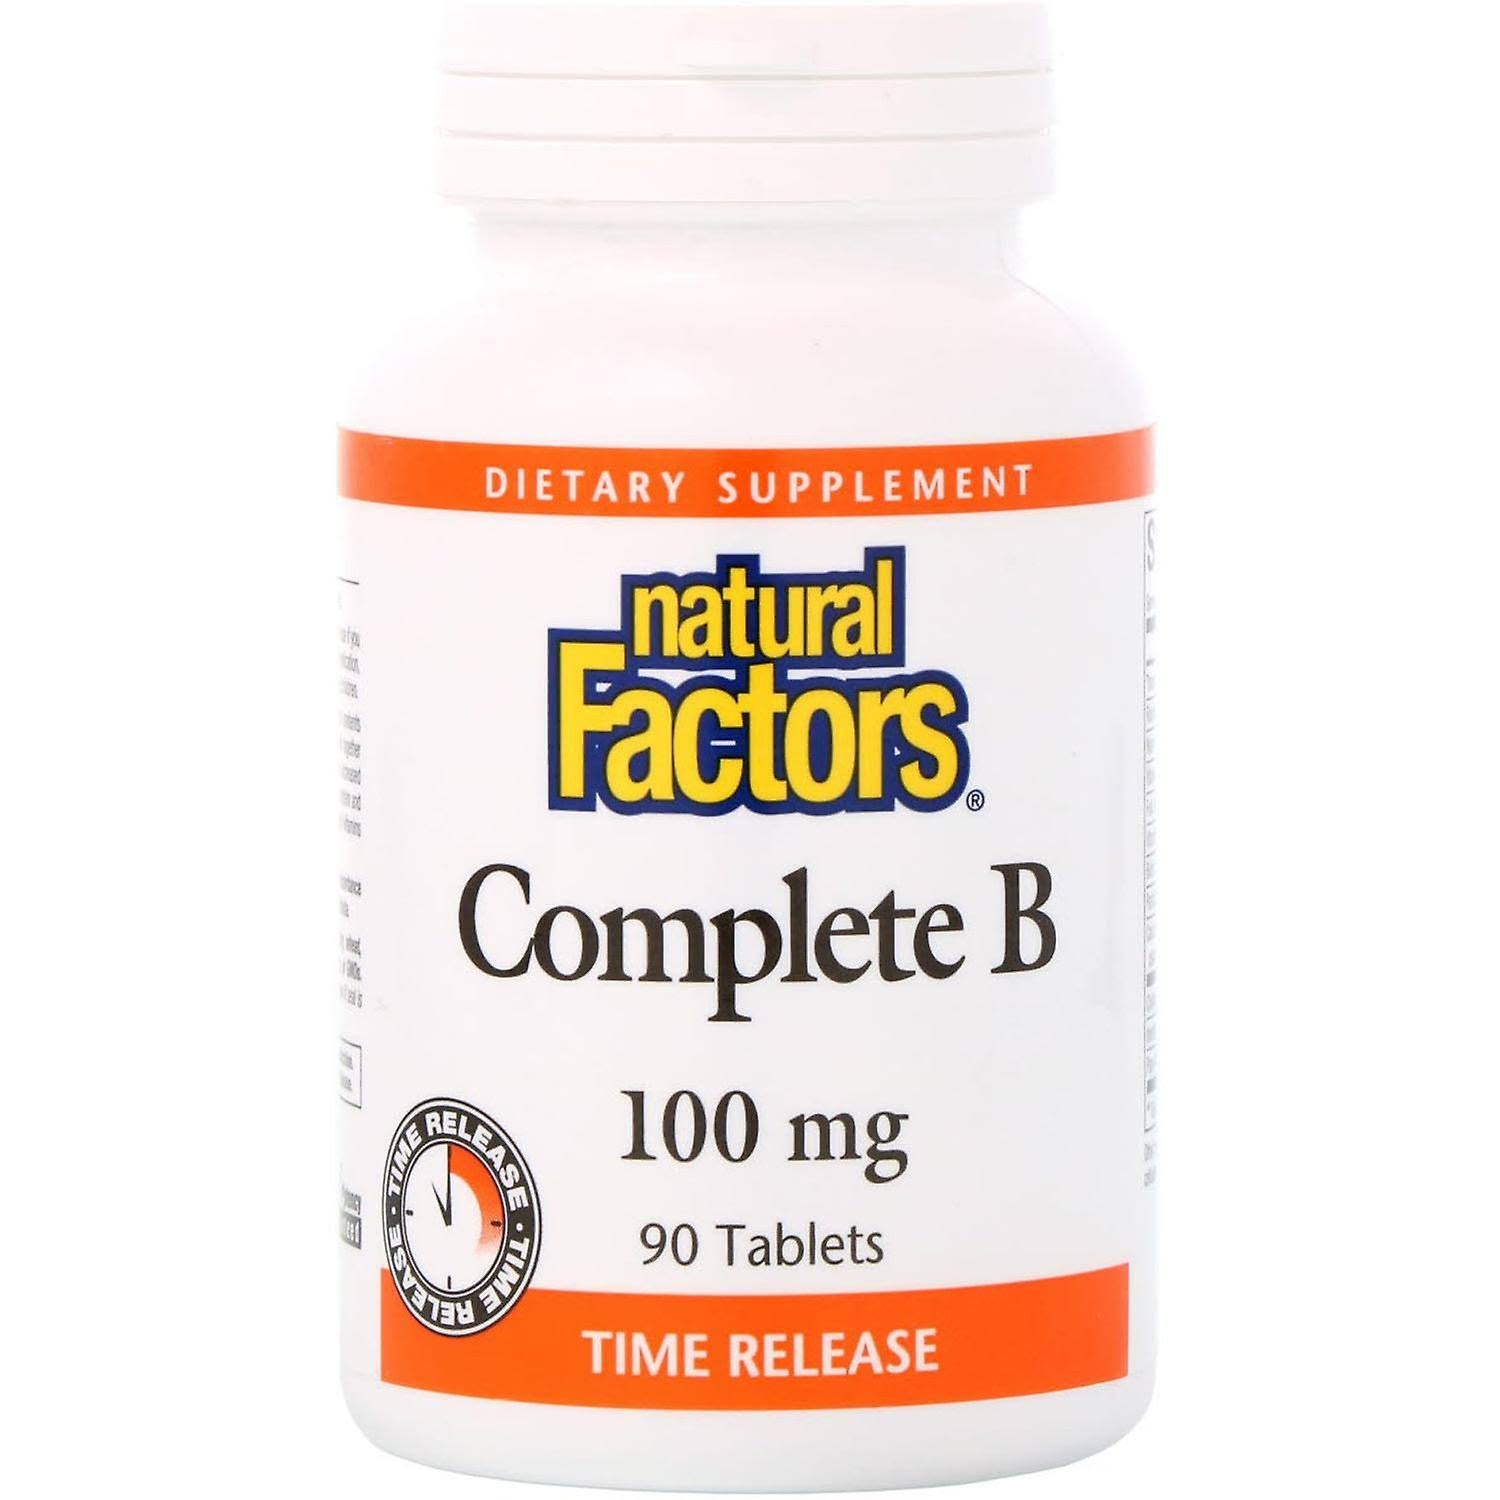 Natural Factors Complete B Dietary Supplement - 100mg, 90ct